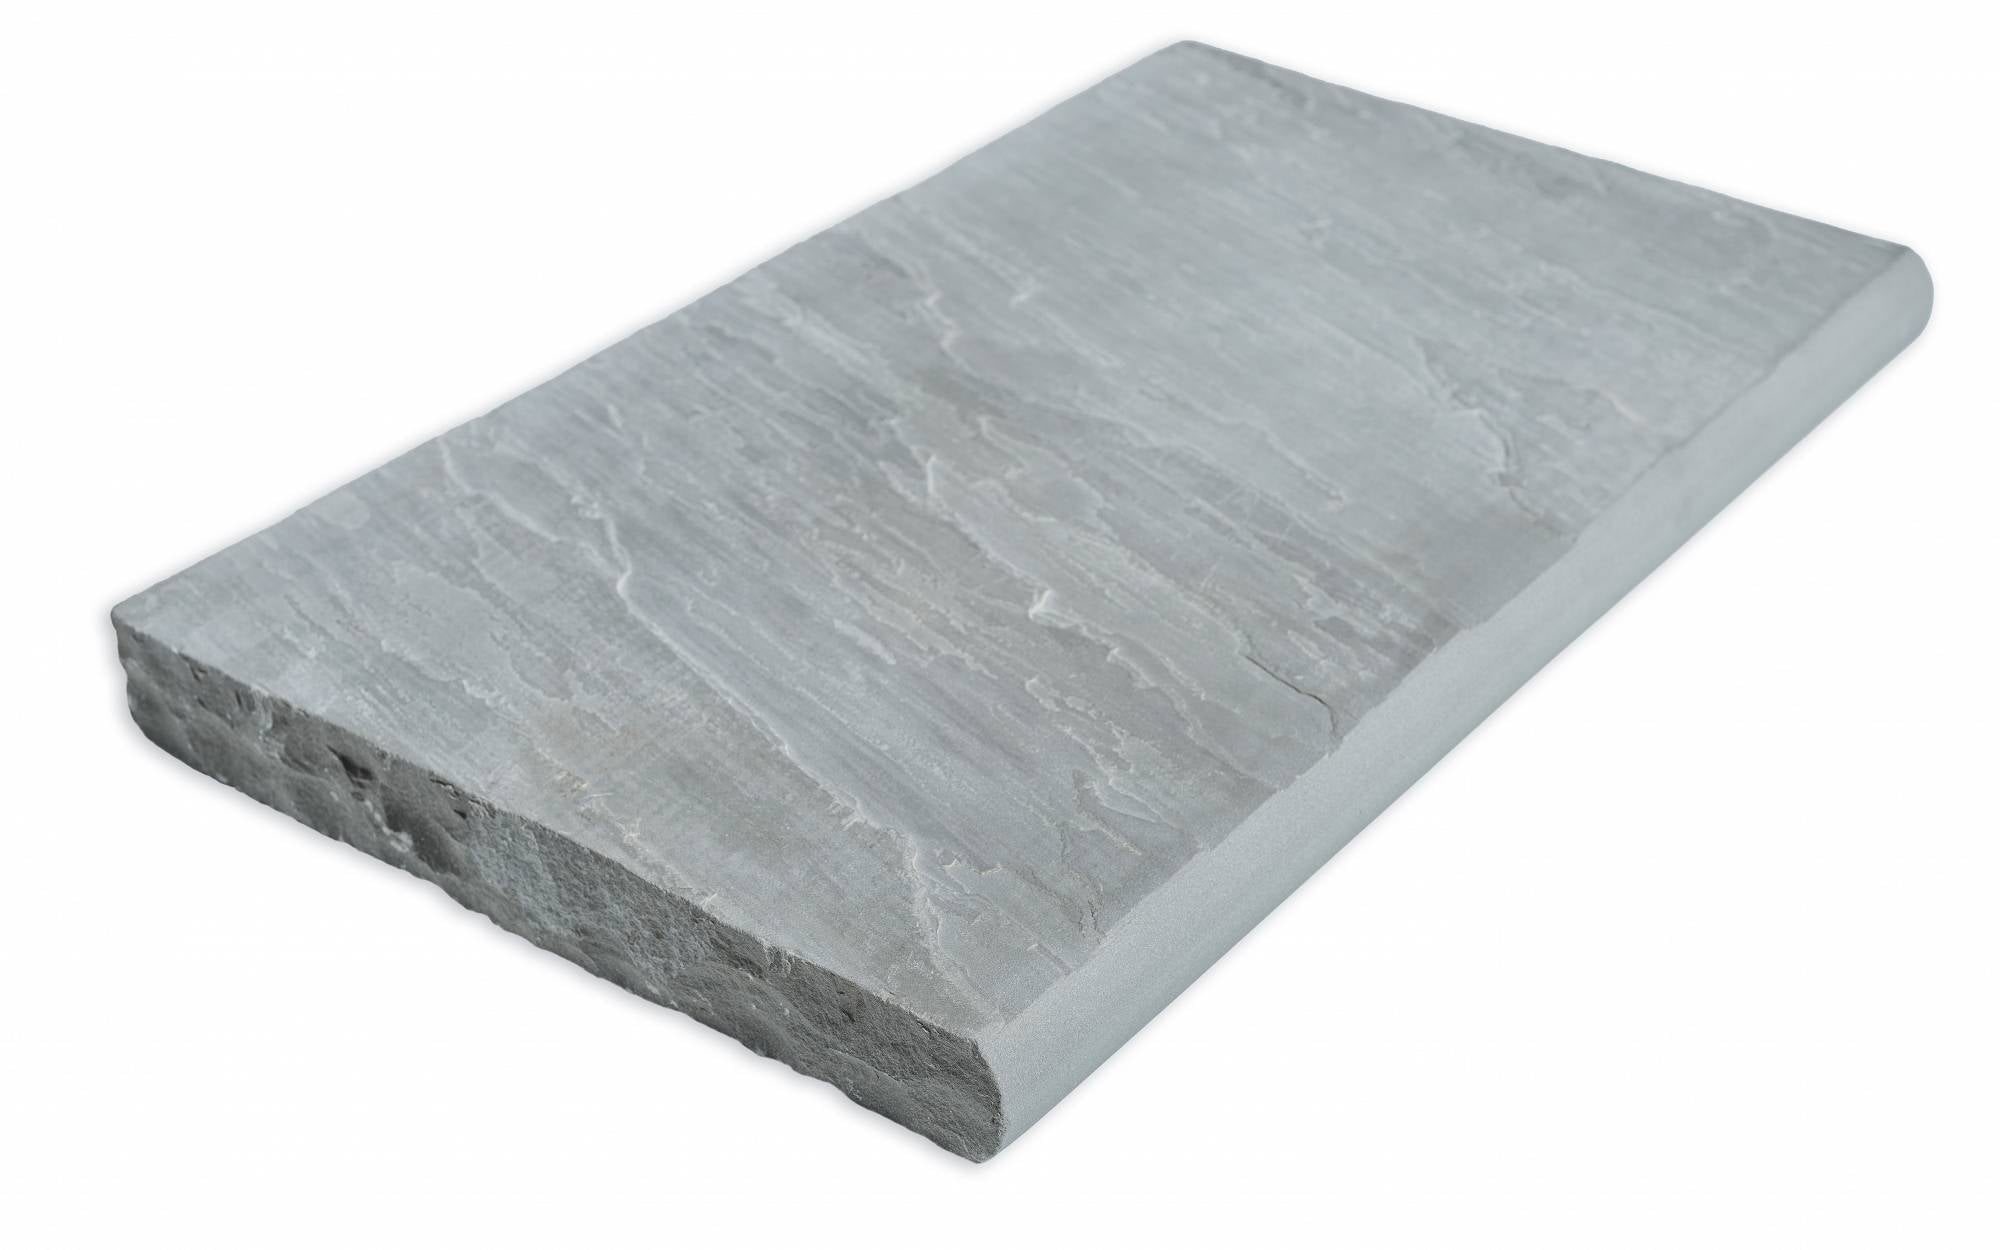 appalachian grey old world flagstone artisan paver bullnose molding 14 by 24 by 2 inch exterior applications manufactured by f and m supply distributed by surface group